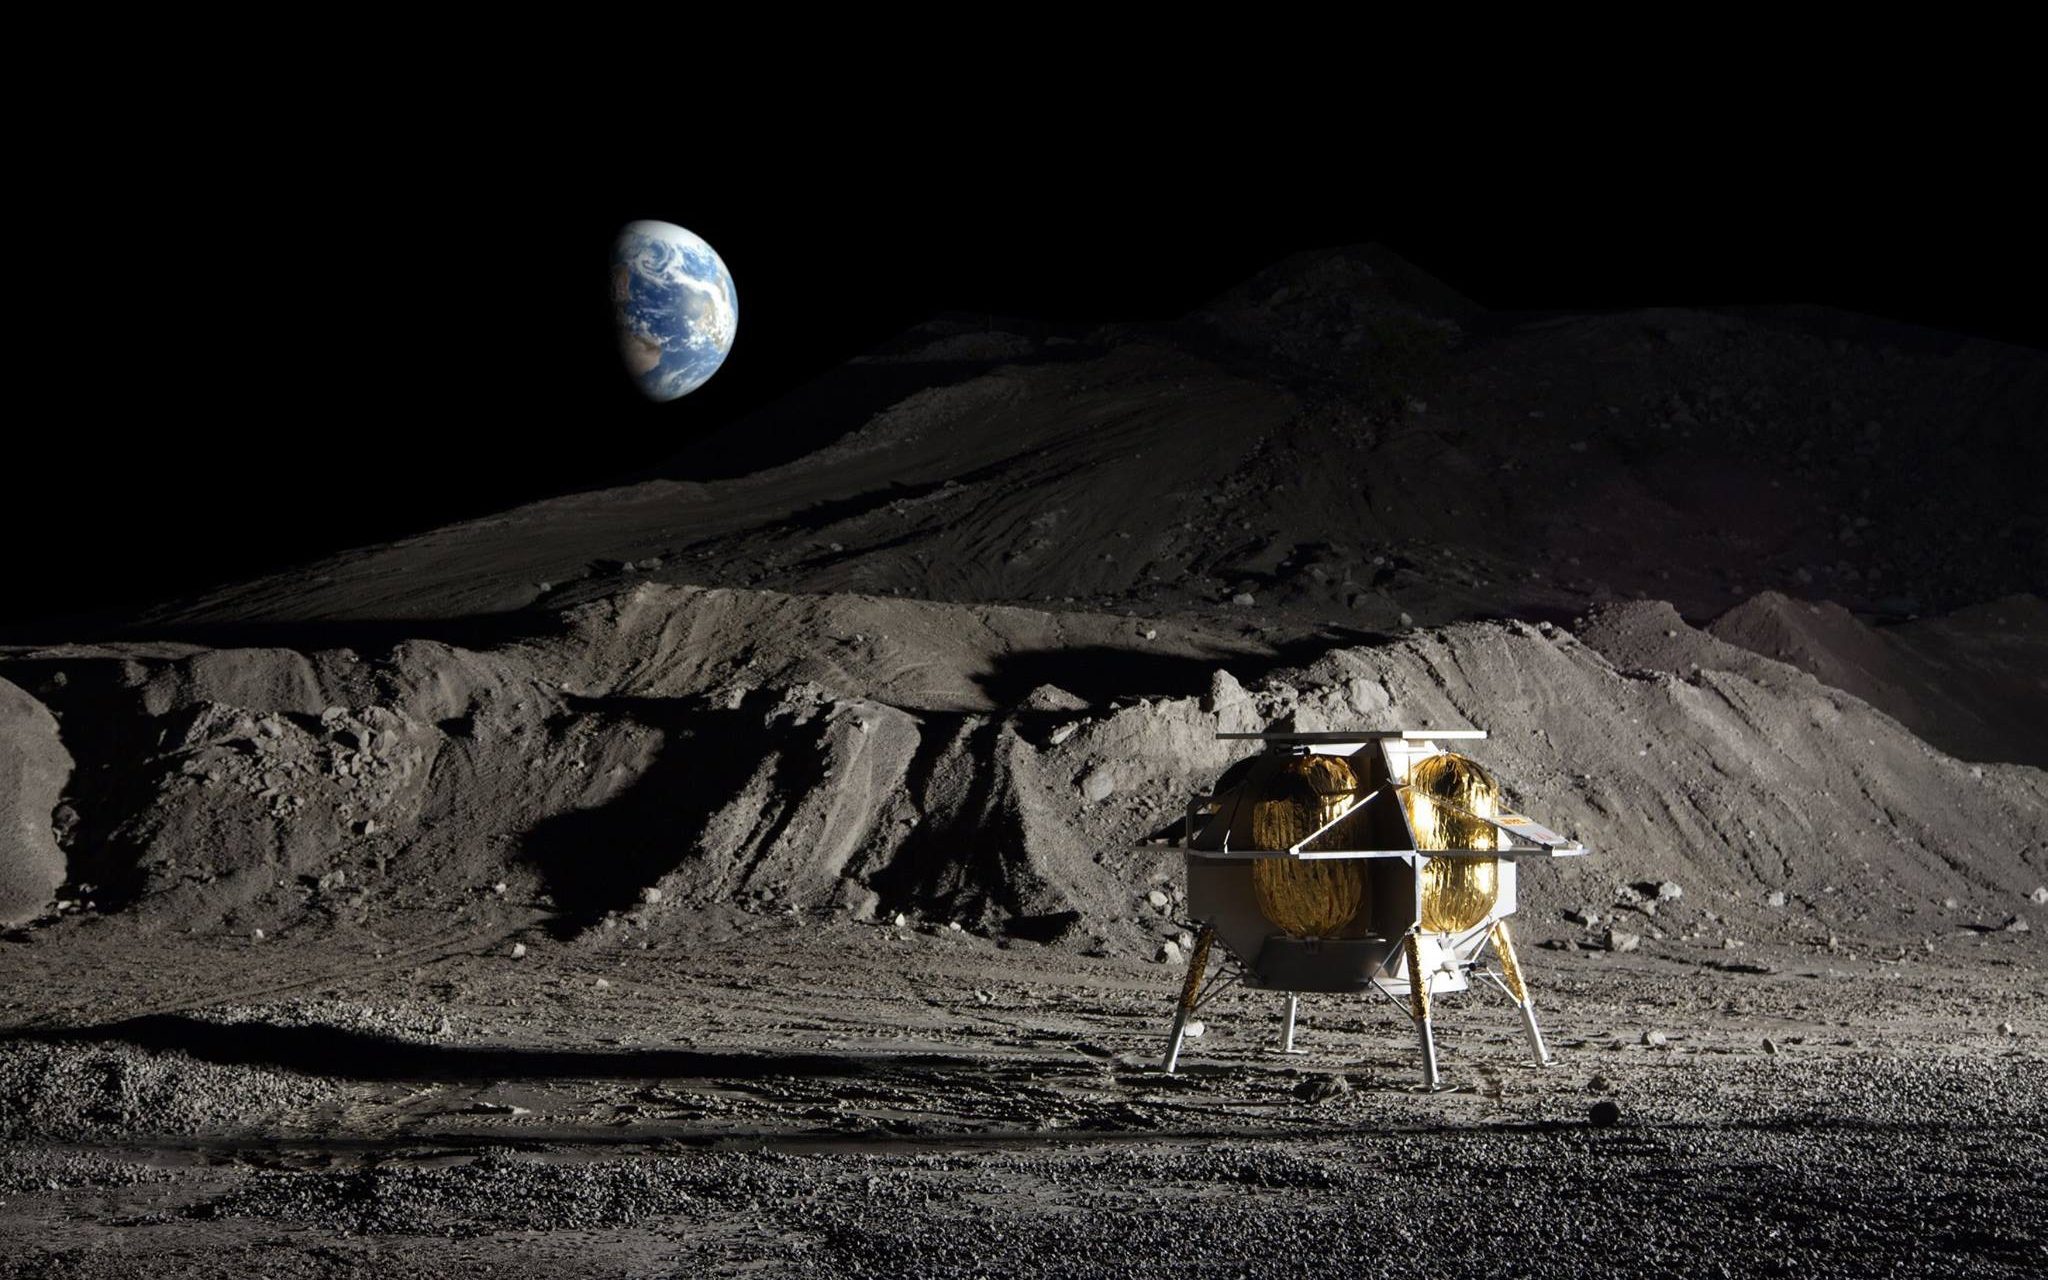 us spacecraft has ‘no chance’ of landing on moon, scientists concede